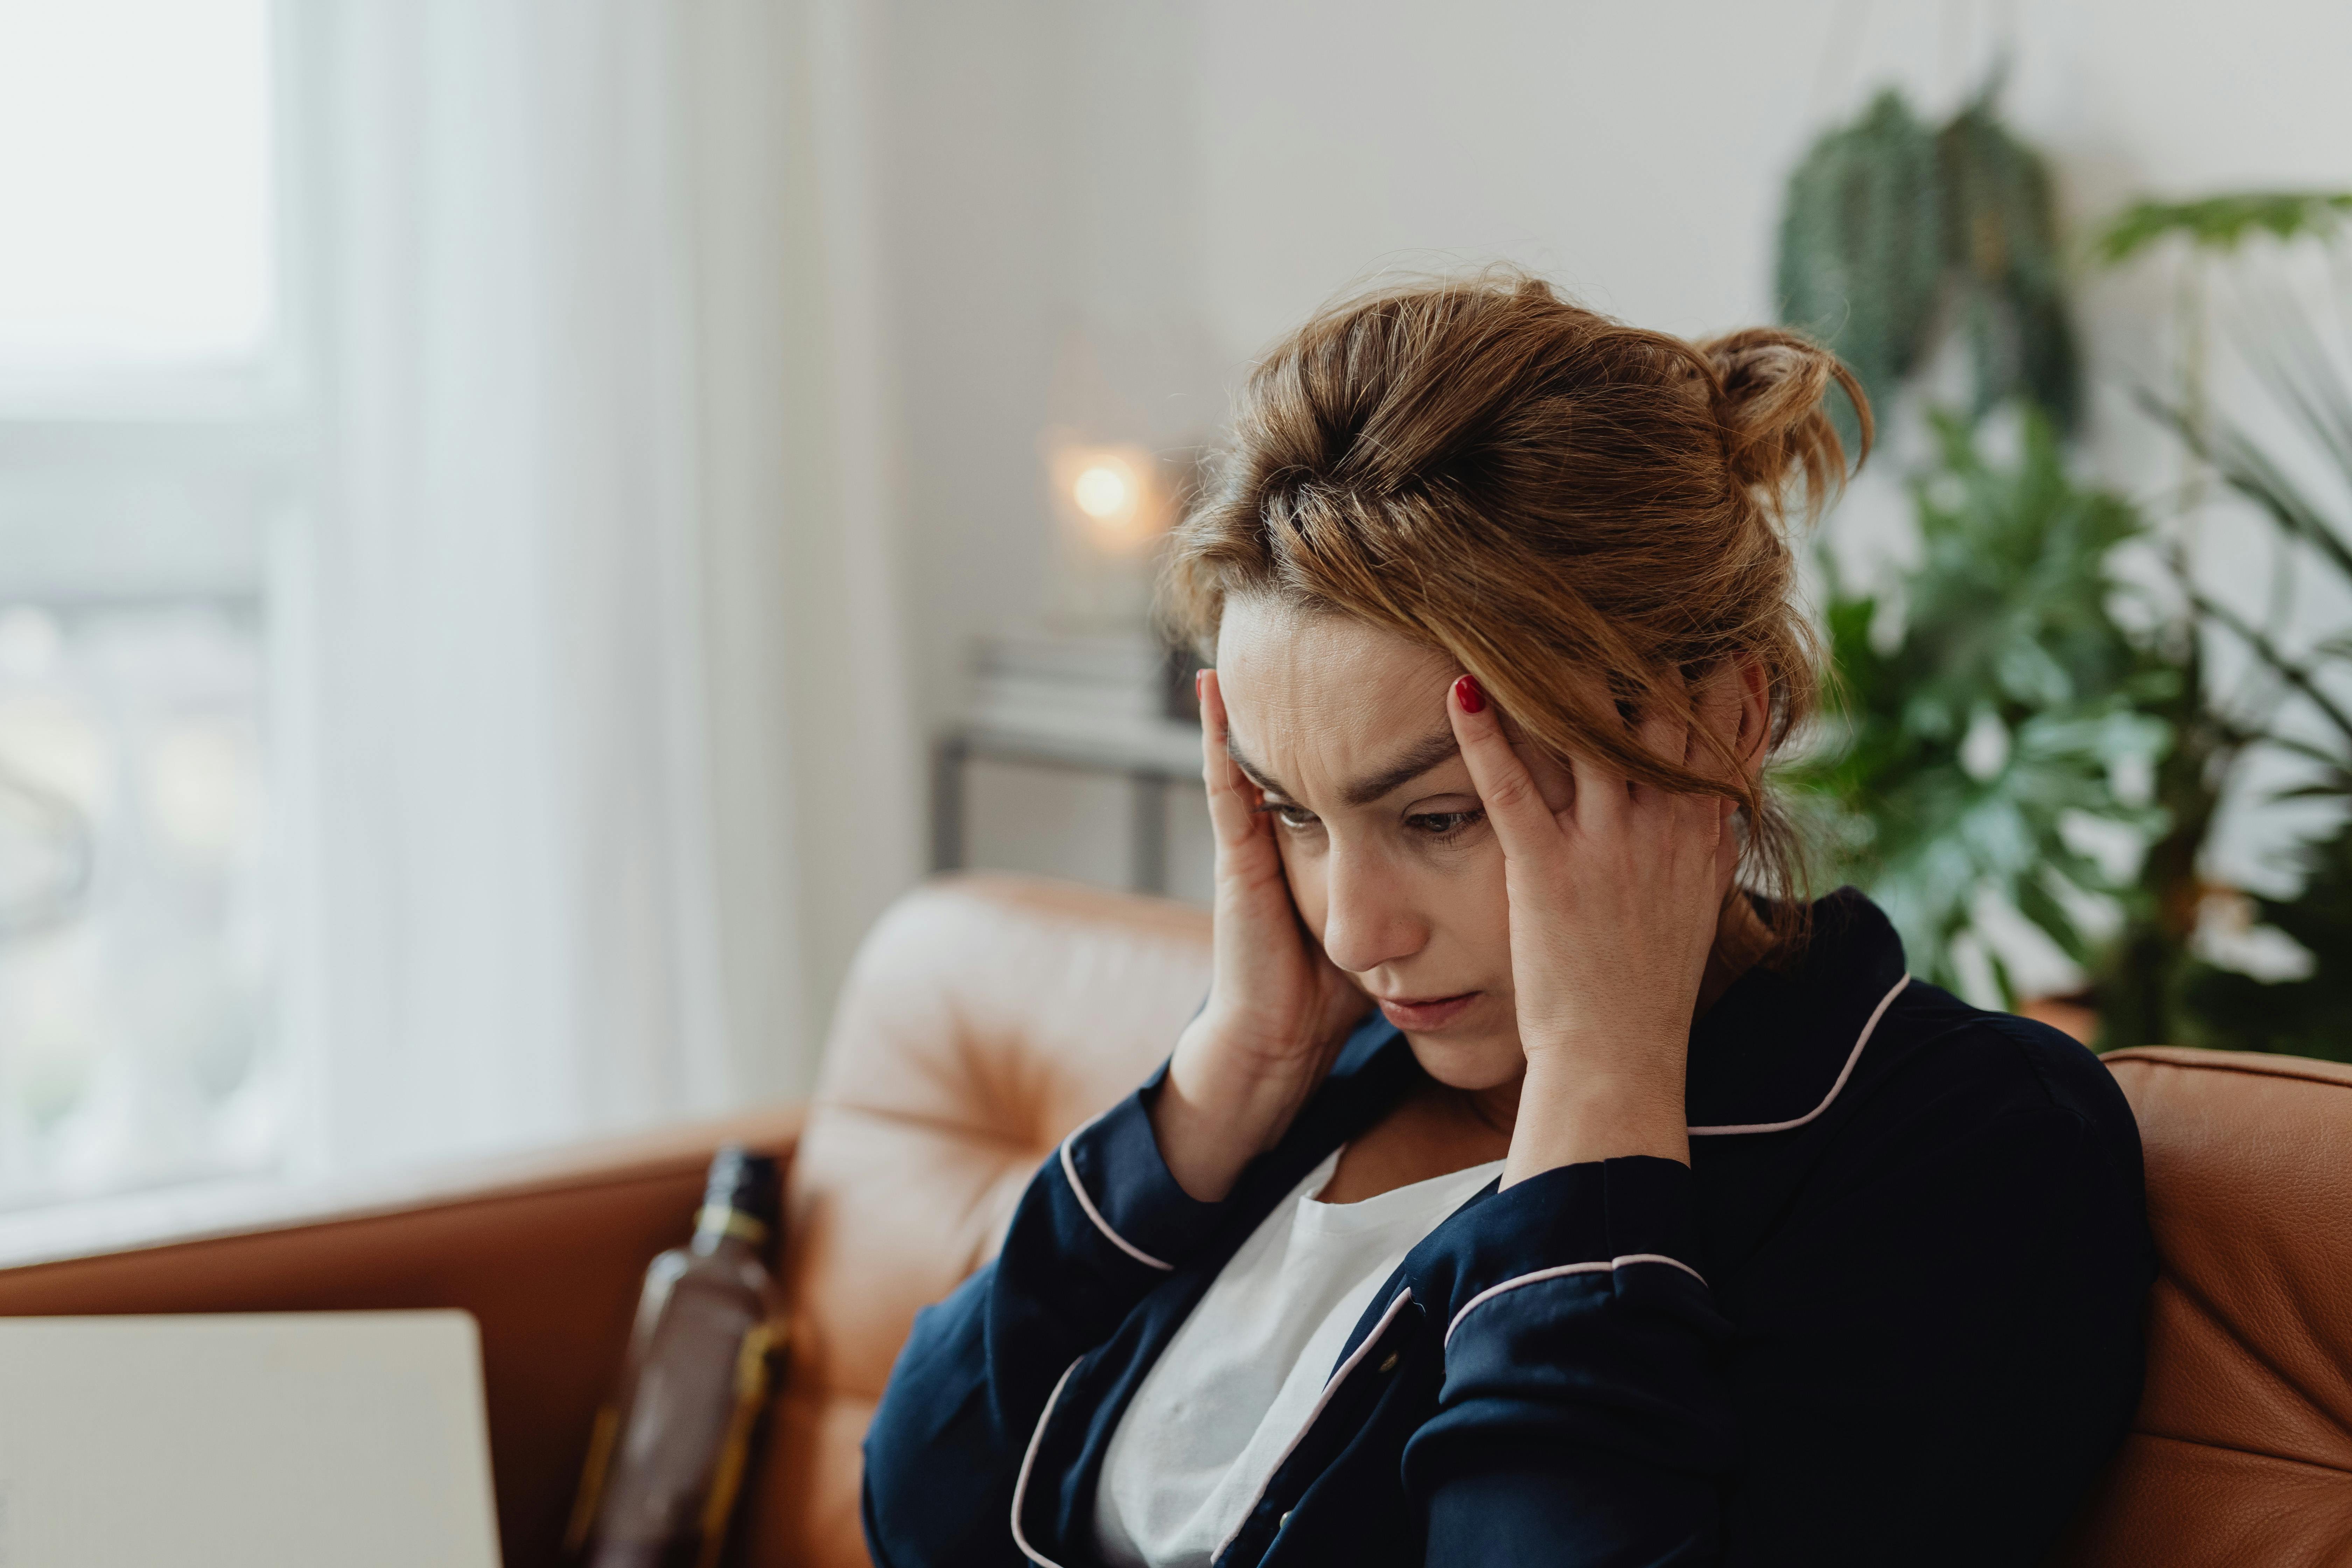 Woman with a headache | Source: Pexels